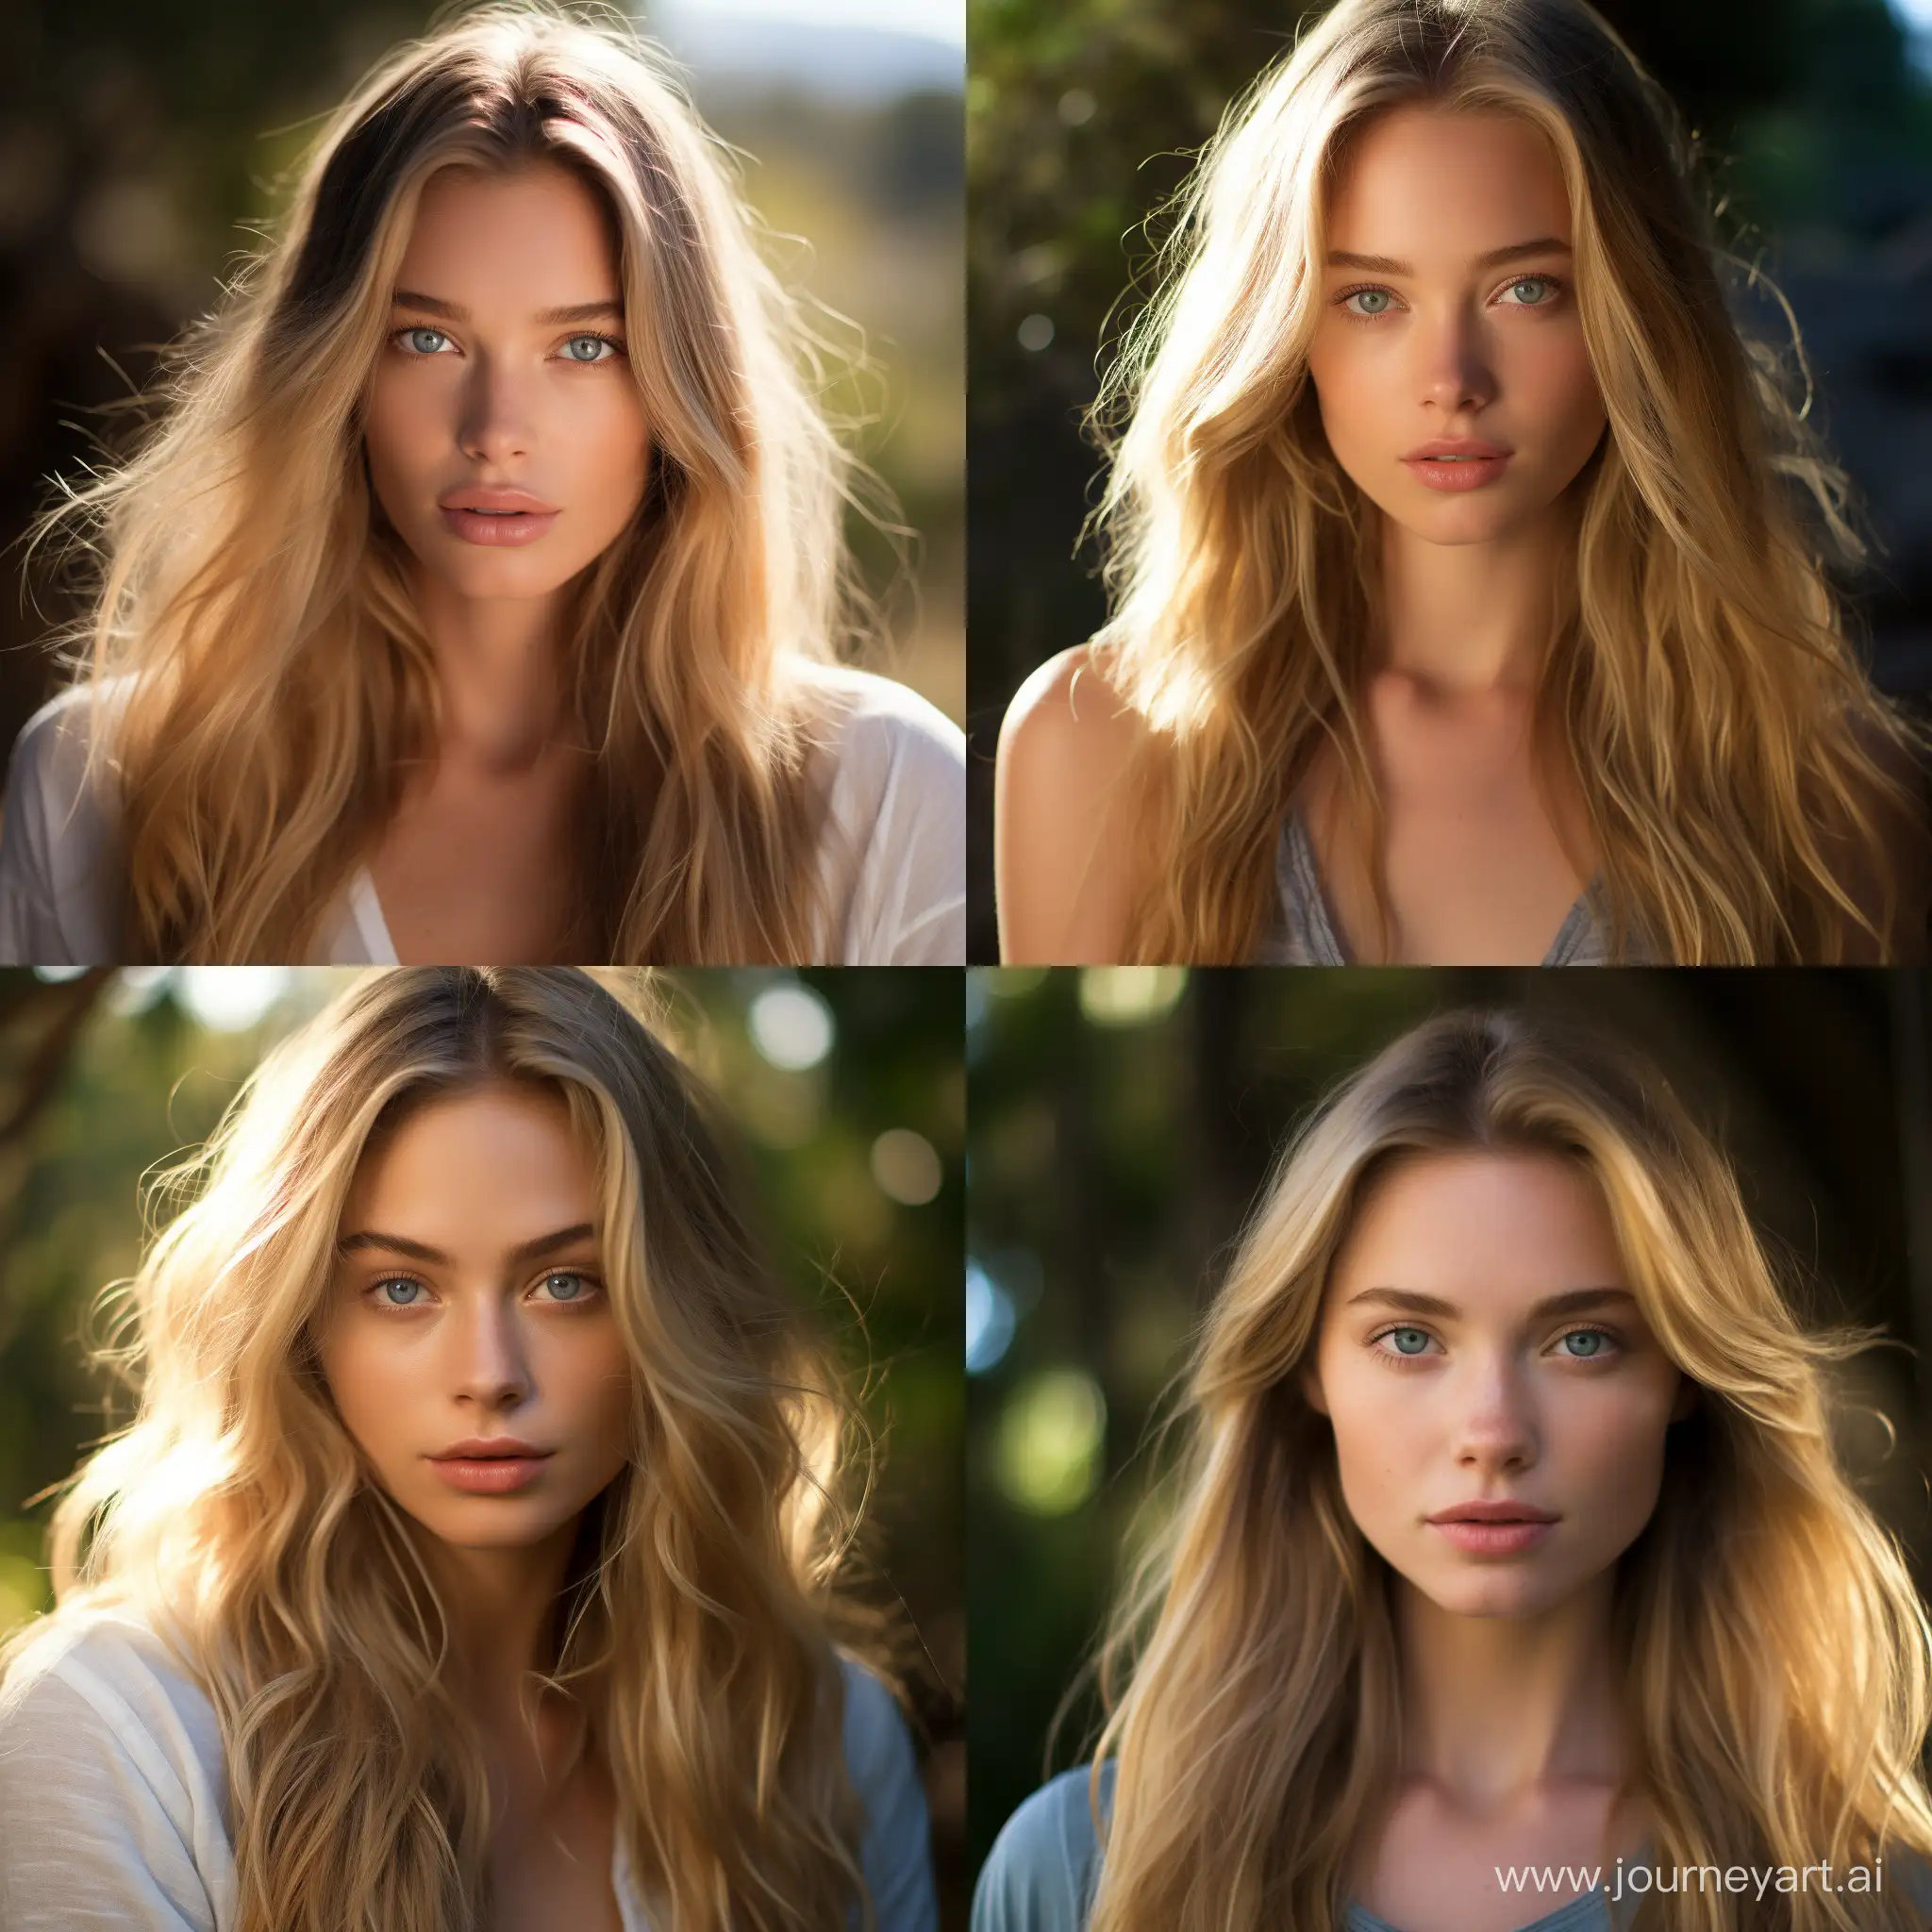 A photorealistic portrait of a 23-year-old Australian girl with long, flowing blonde hair, perfect cheekbones and striking blue eyes. She should have a natural, serene expression and be illuminated by morning hour sunlight. The background should be a scenic outdoor setting, perhaps a garden or beach. Capture this image with a high-resolution Canon camera using an 85mm lens for a flattering perspective.